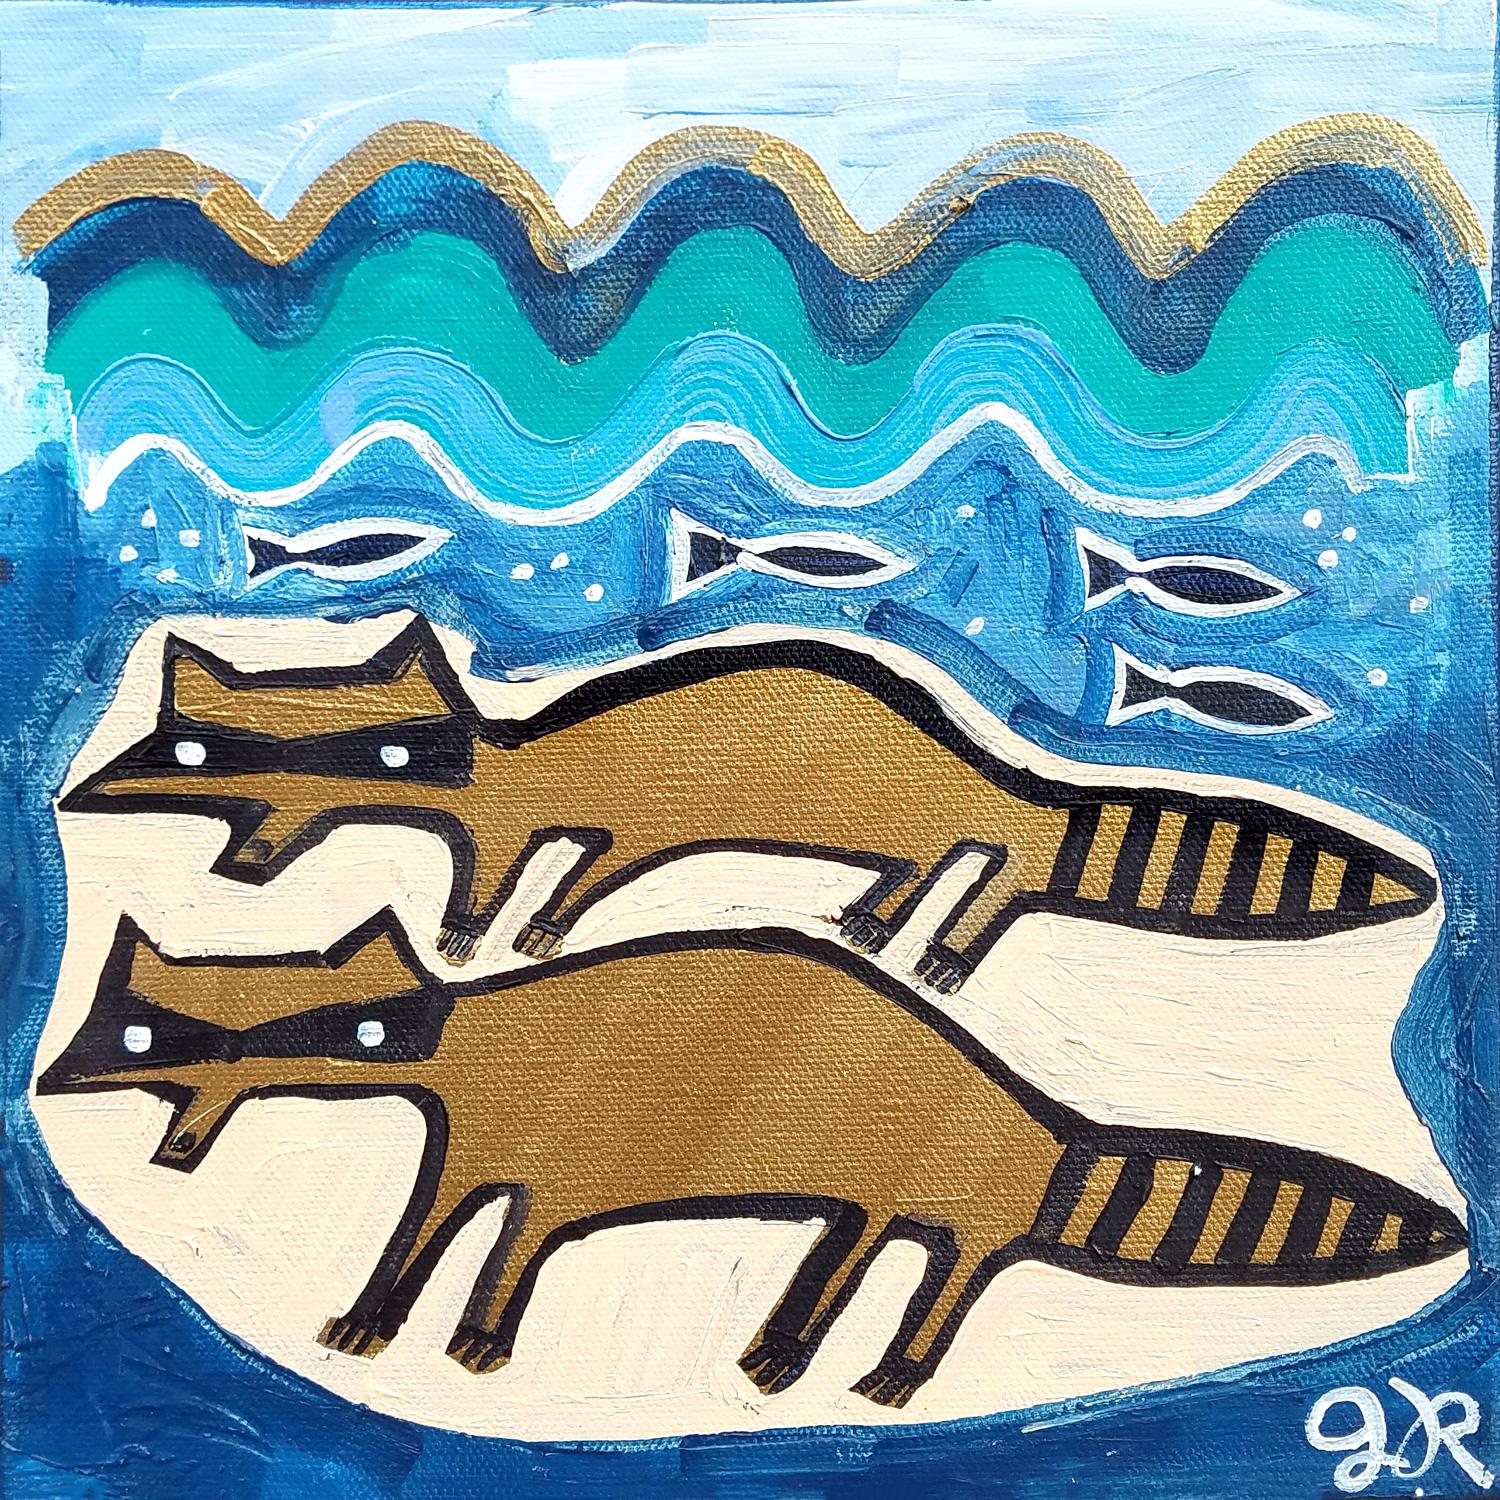 Jessica JH Roller Animal Painting - Raccoons on the Beach, Original Painting